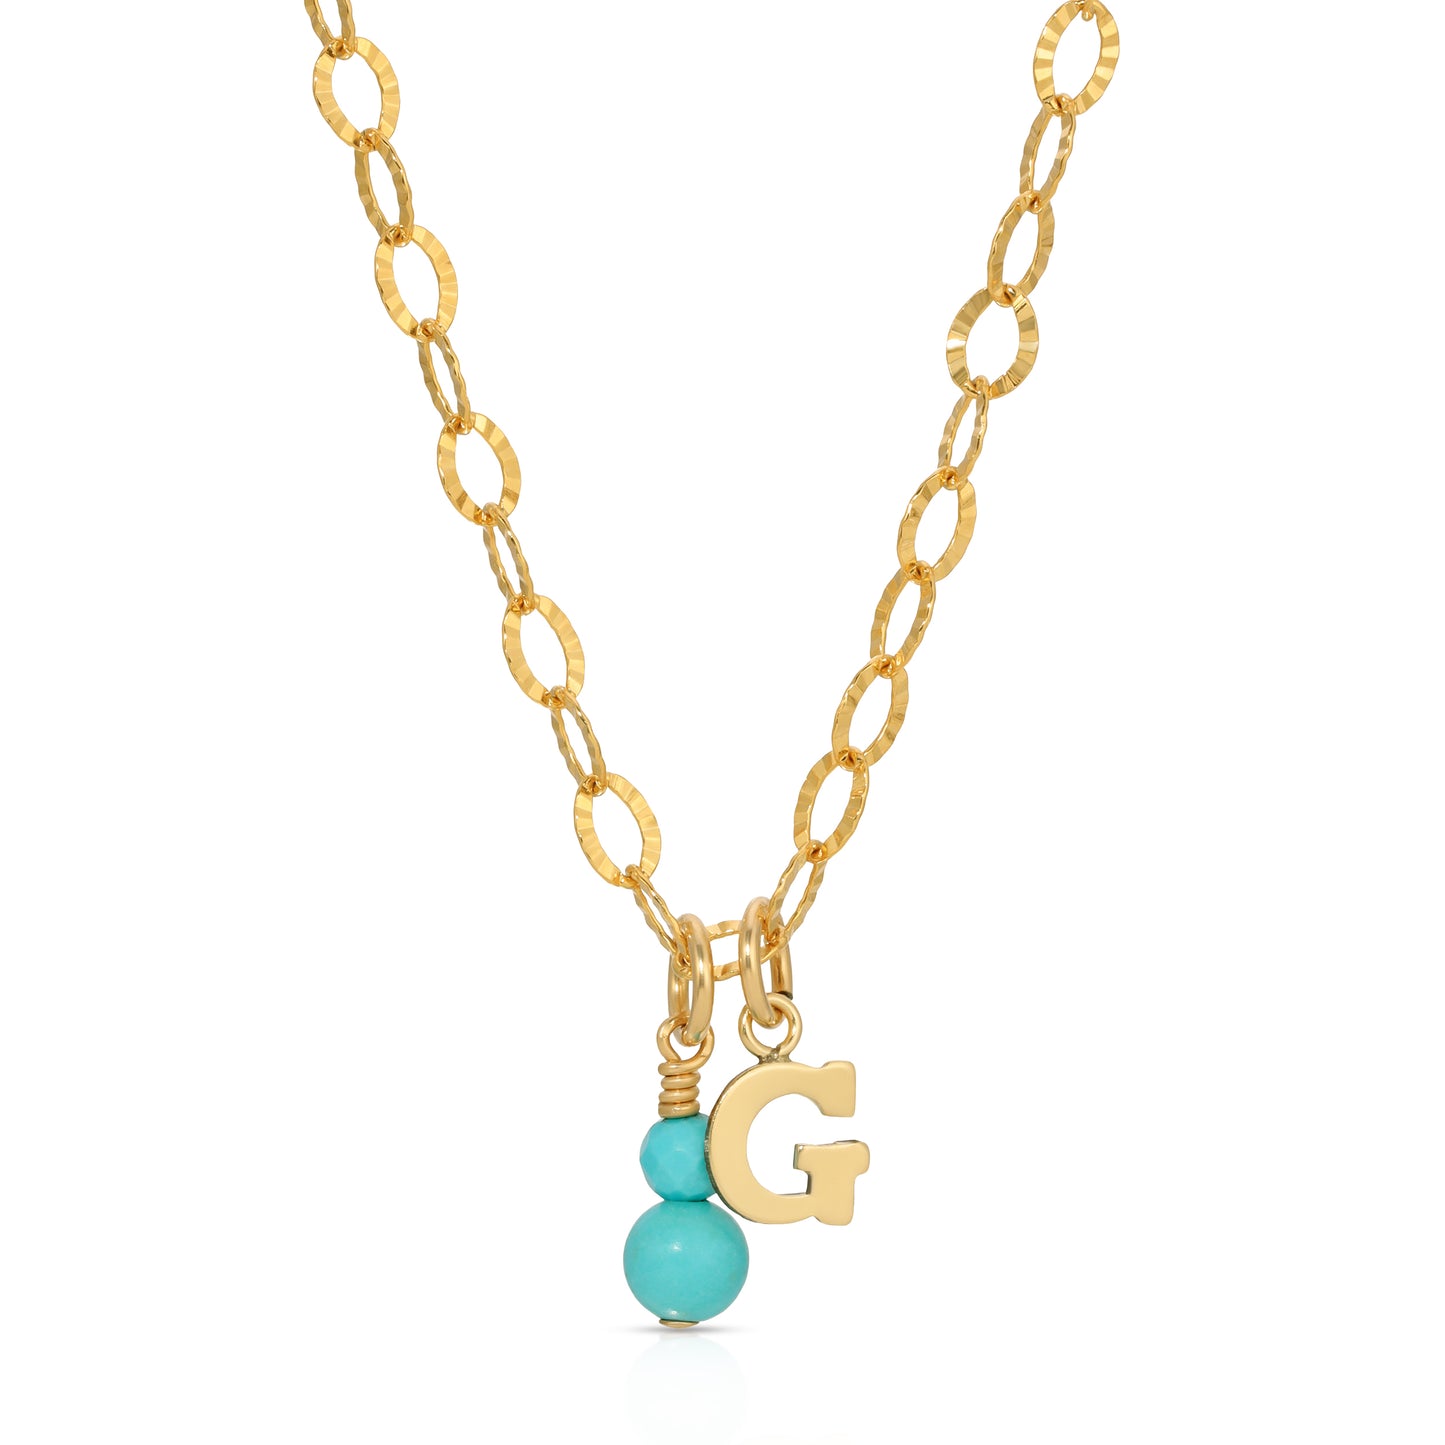 Initial necklace with choice of Turquoise cross or charm in 14KT Goldfilled.